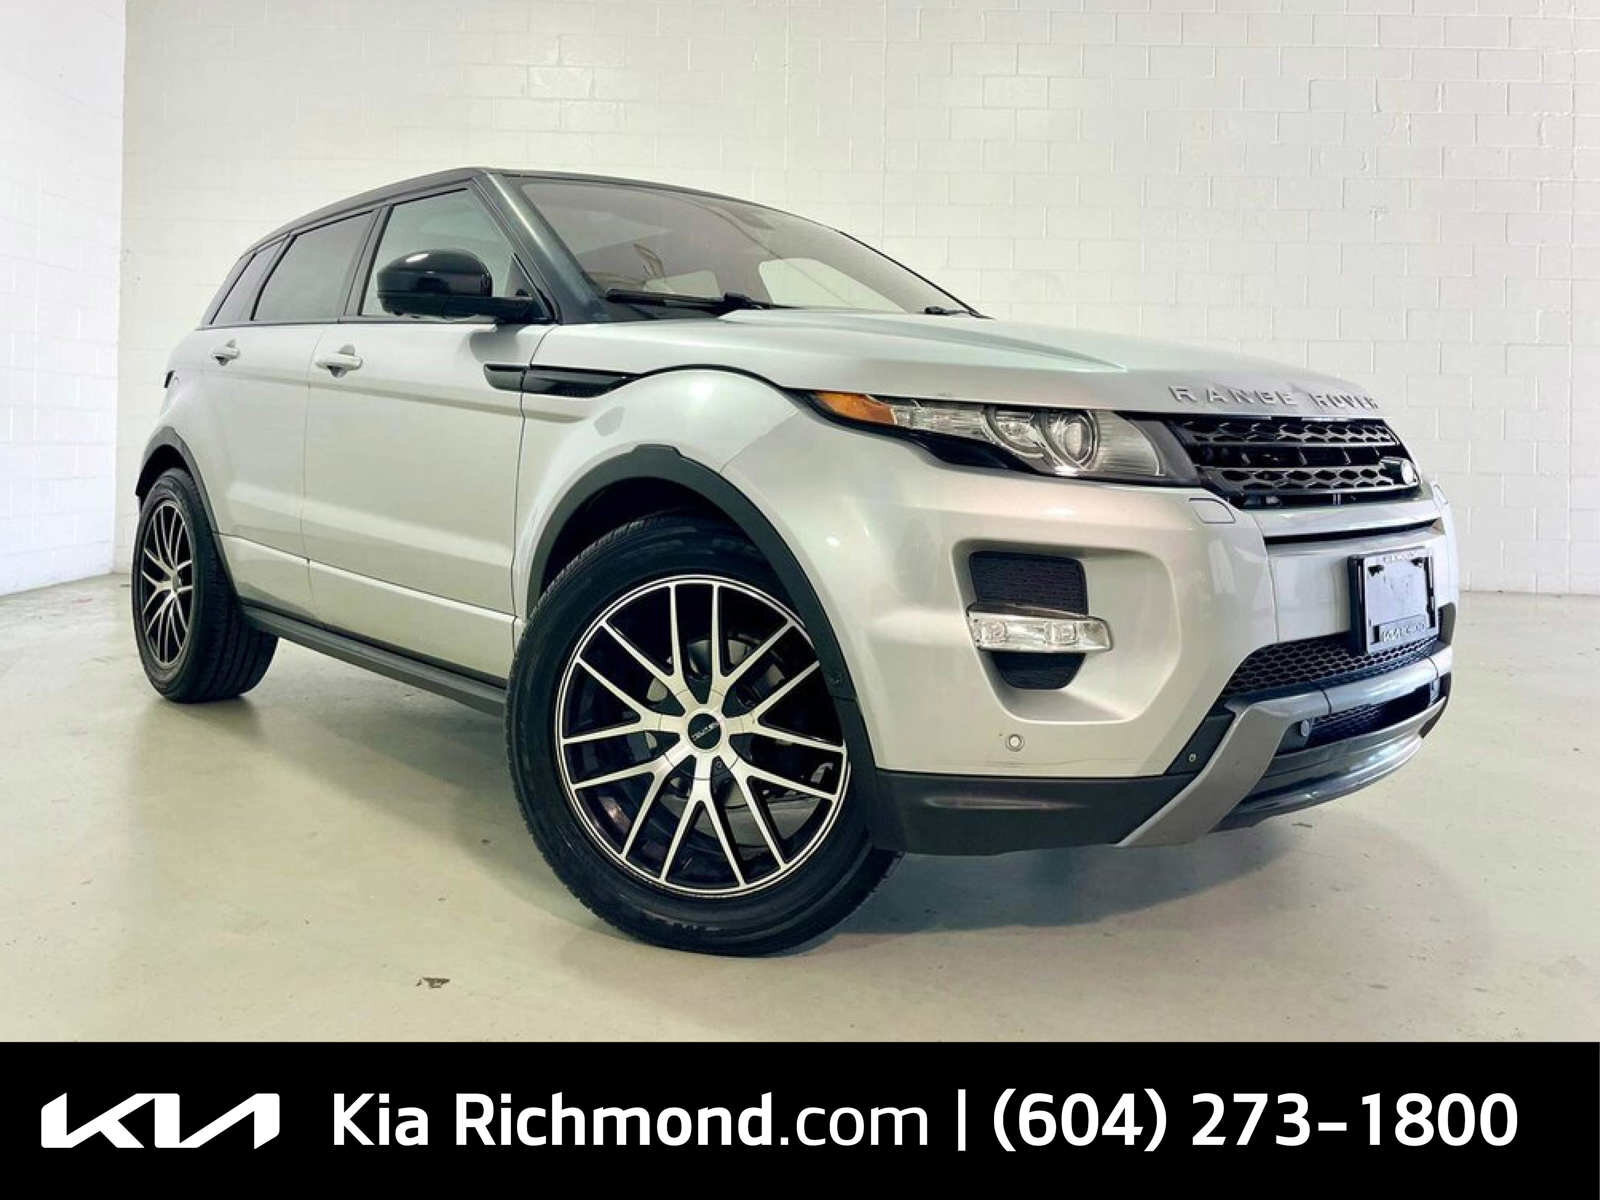 2014 Land Rover Range Rover Evoque | DYNAMIC | PANORAMIC SUNROOF | LEATHER SEATS